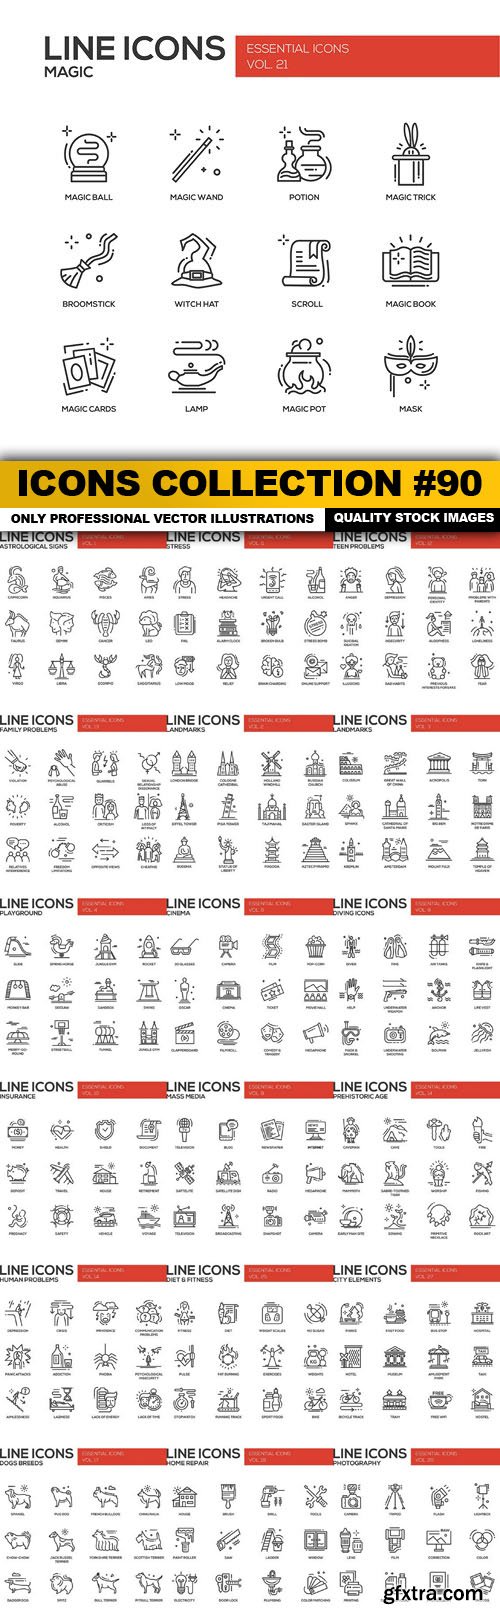 Icons Collection #90 - 19 Vector